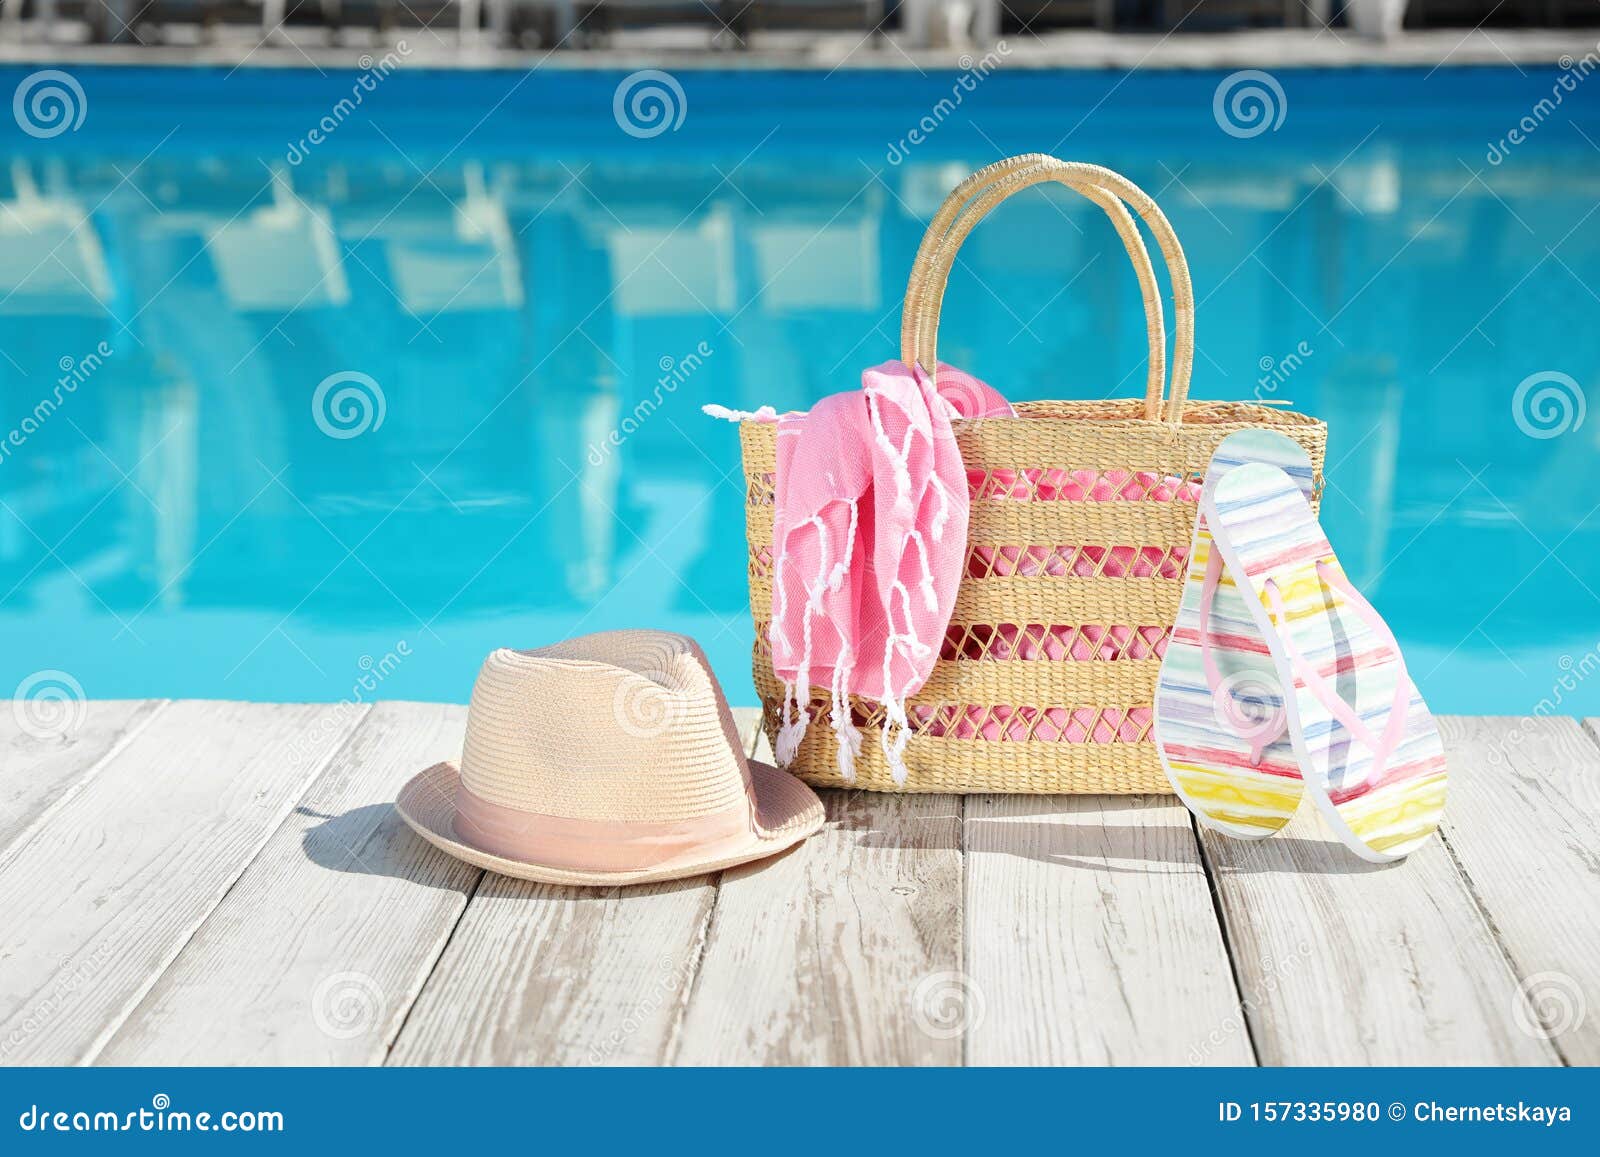 Beach Accessories On Wooden Deck Near Swimming Pool Stock ...